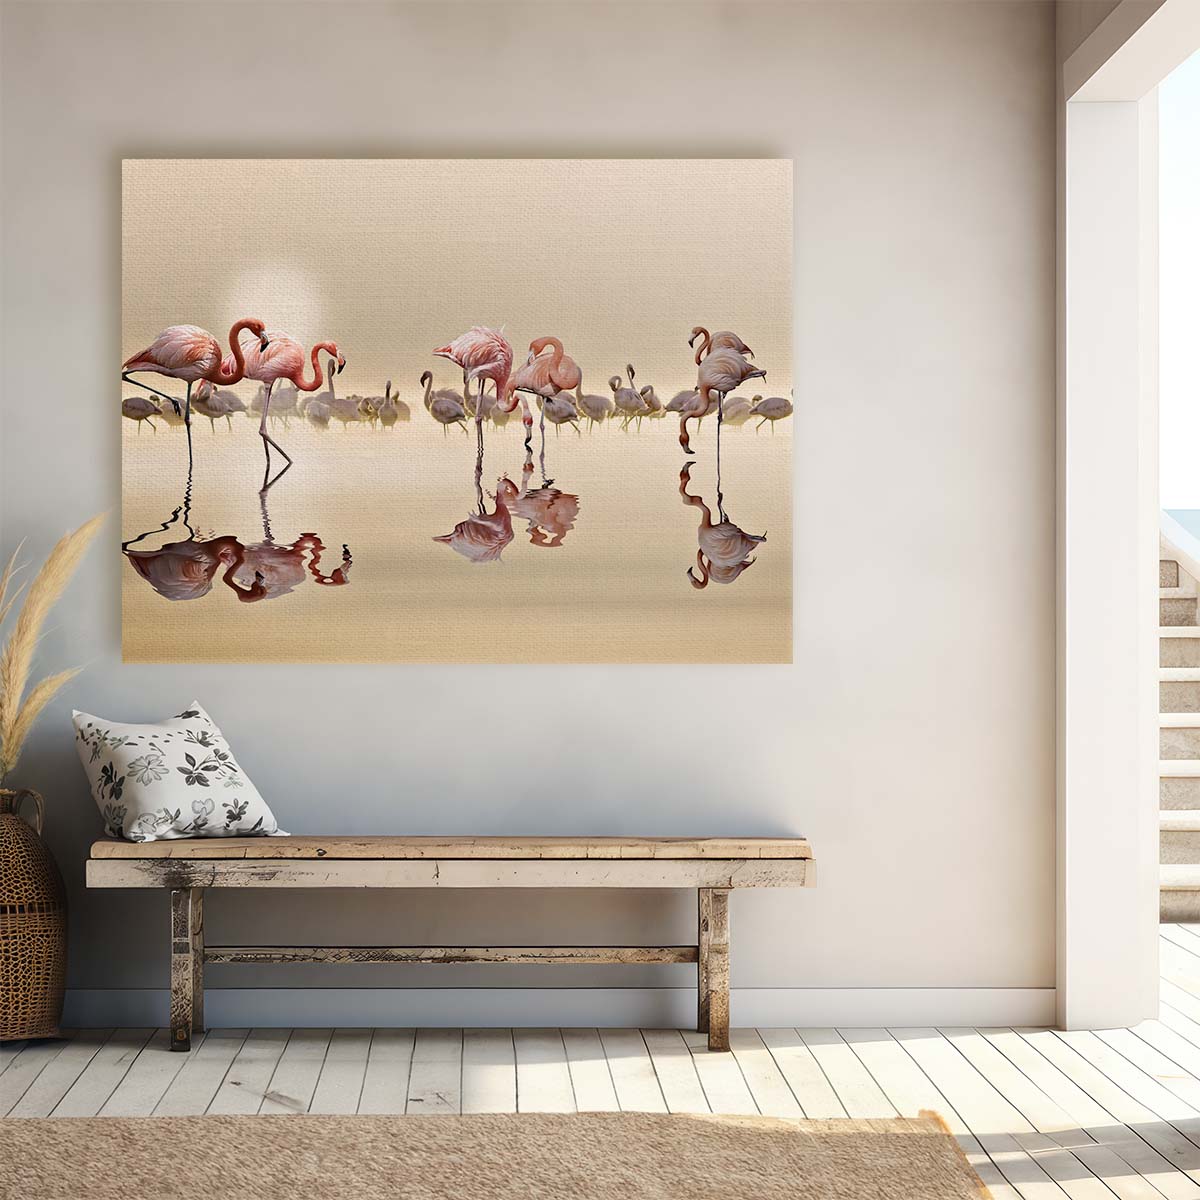 Romantic Pink Flamingo Pair in Golden Light Wall Art by Luxuriance Designs. Made in USA.